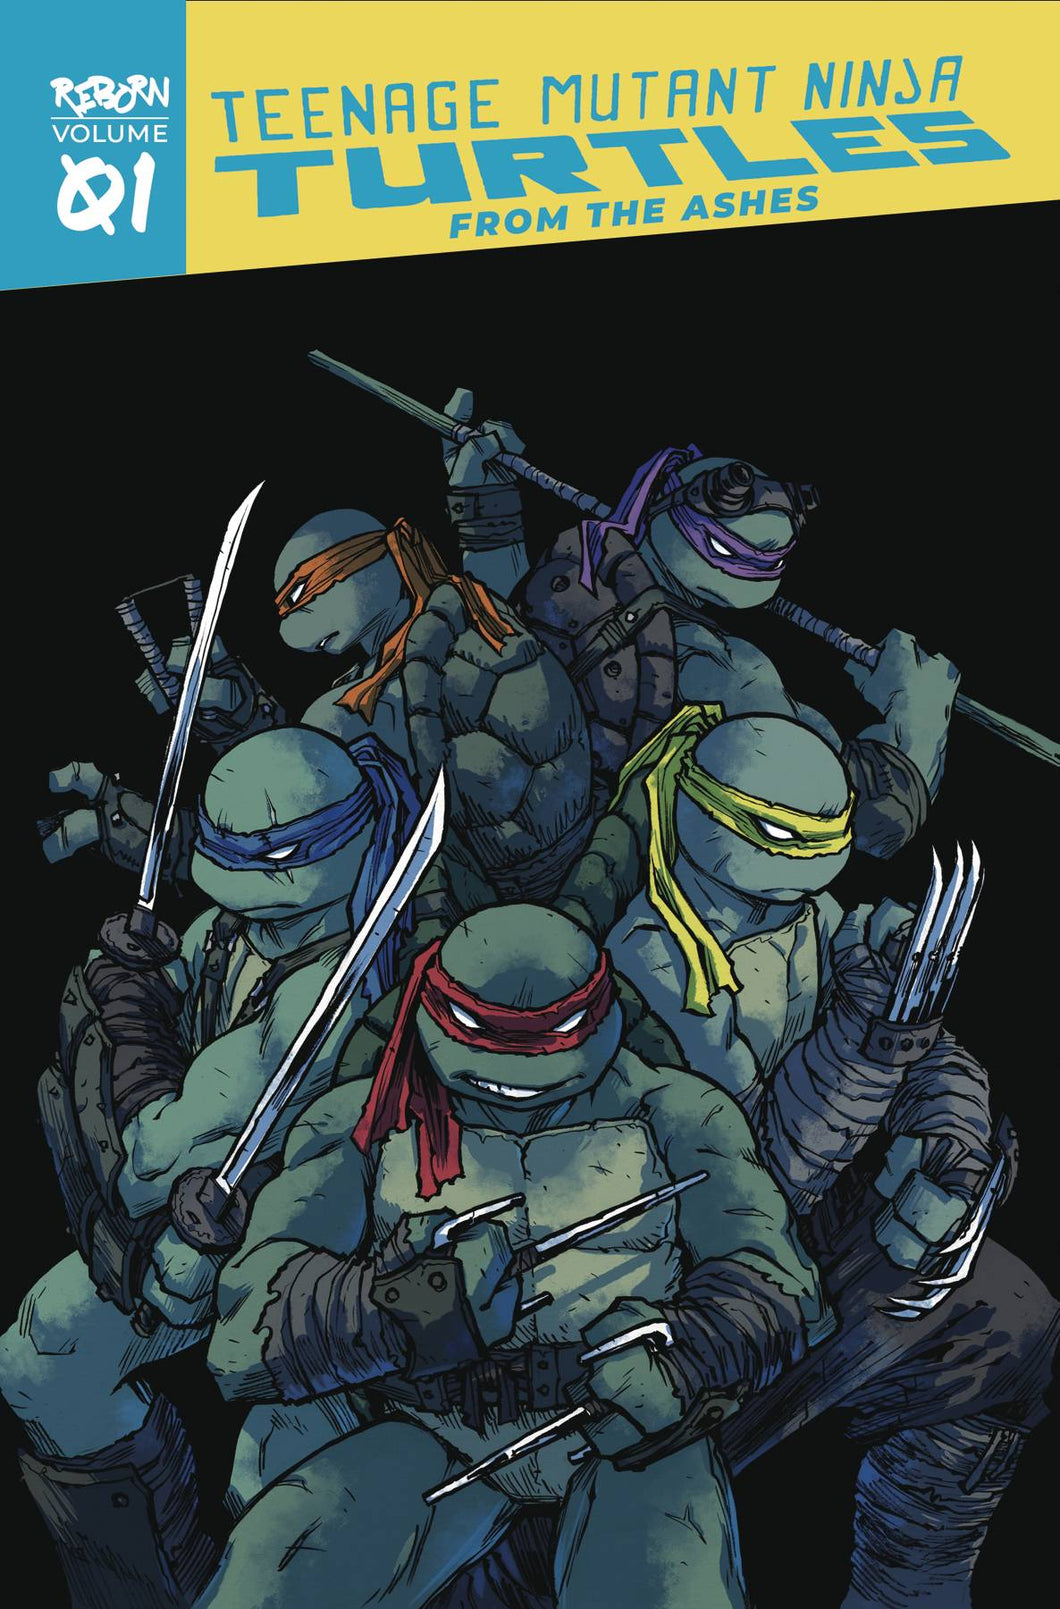 Tmnt Reborn TP Vol 01 From The Ashes - Books